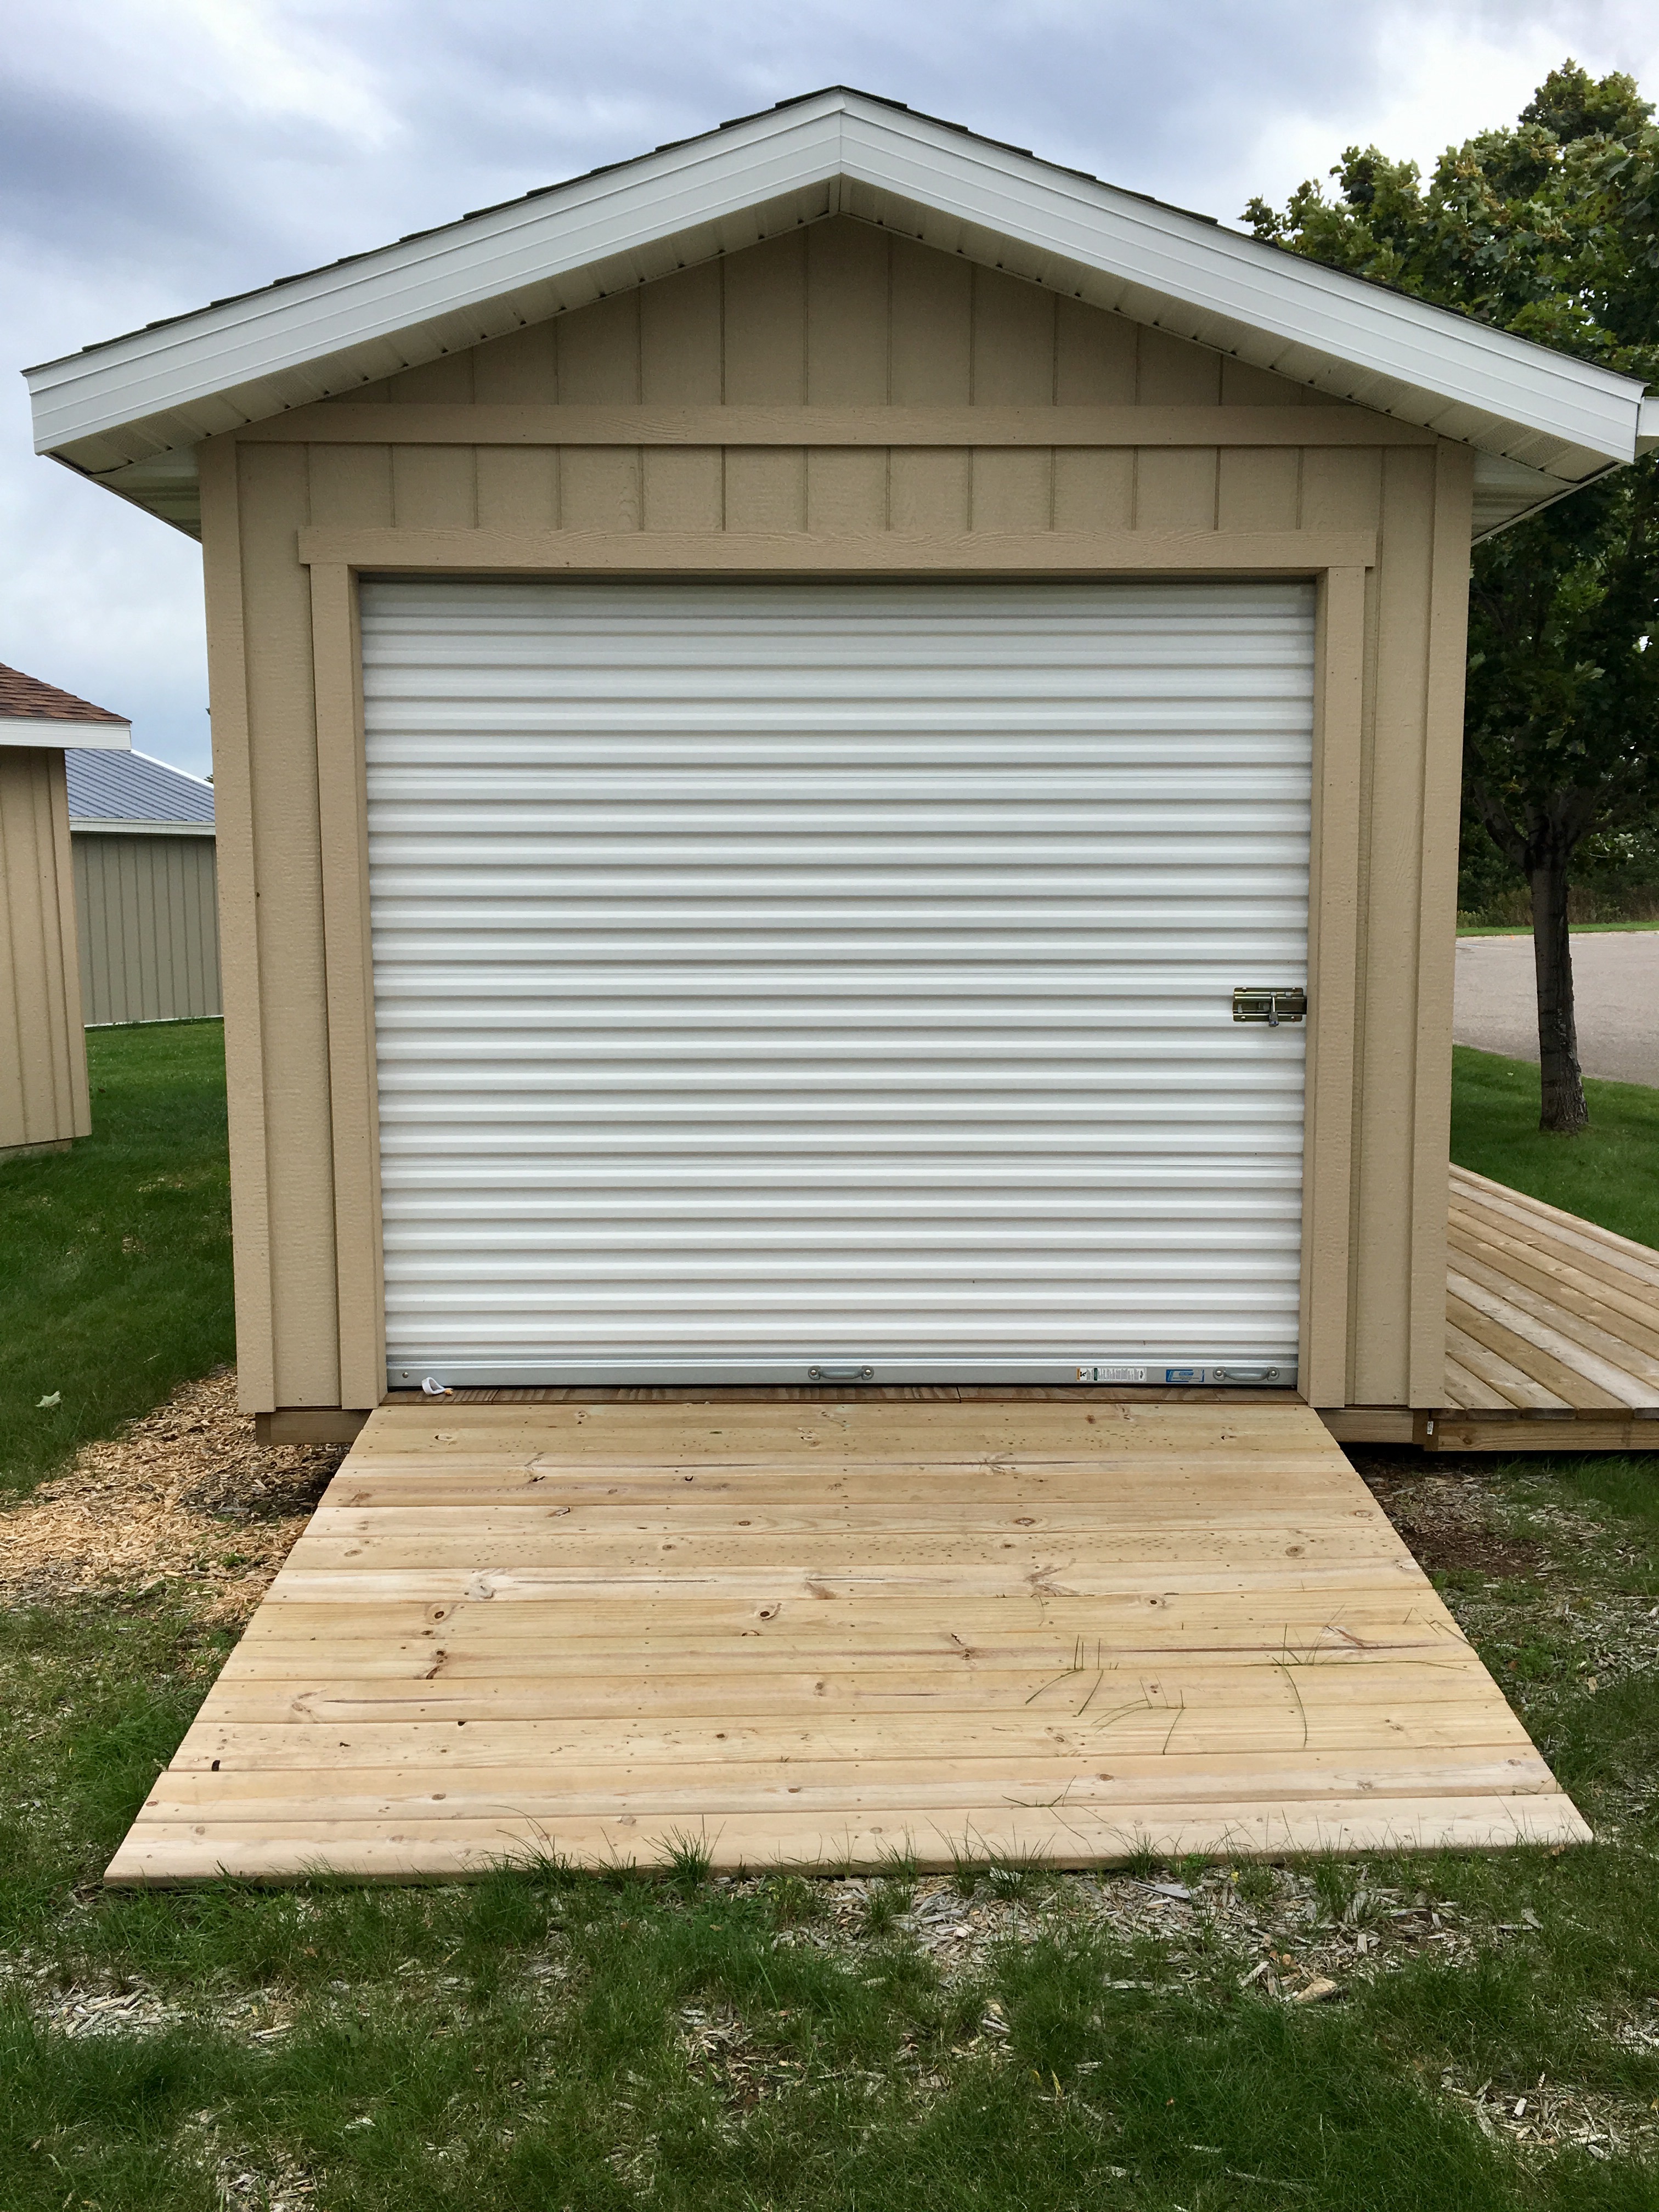 Gallery Premium Pole Building and Storage Sheds